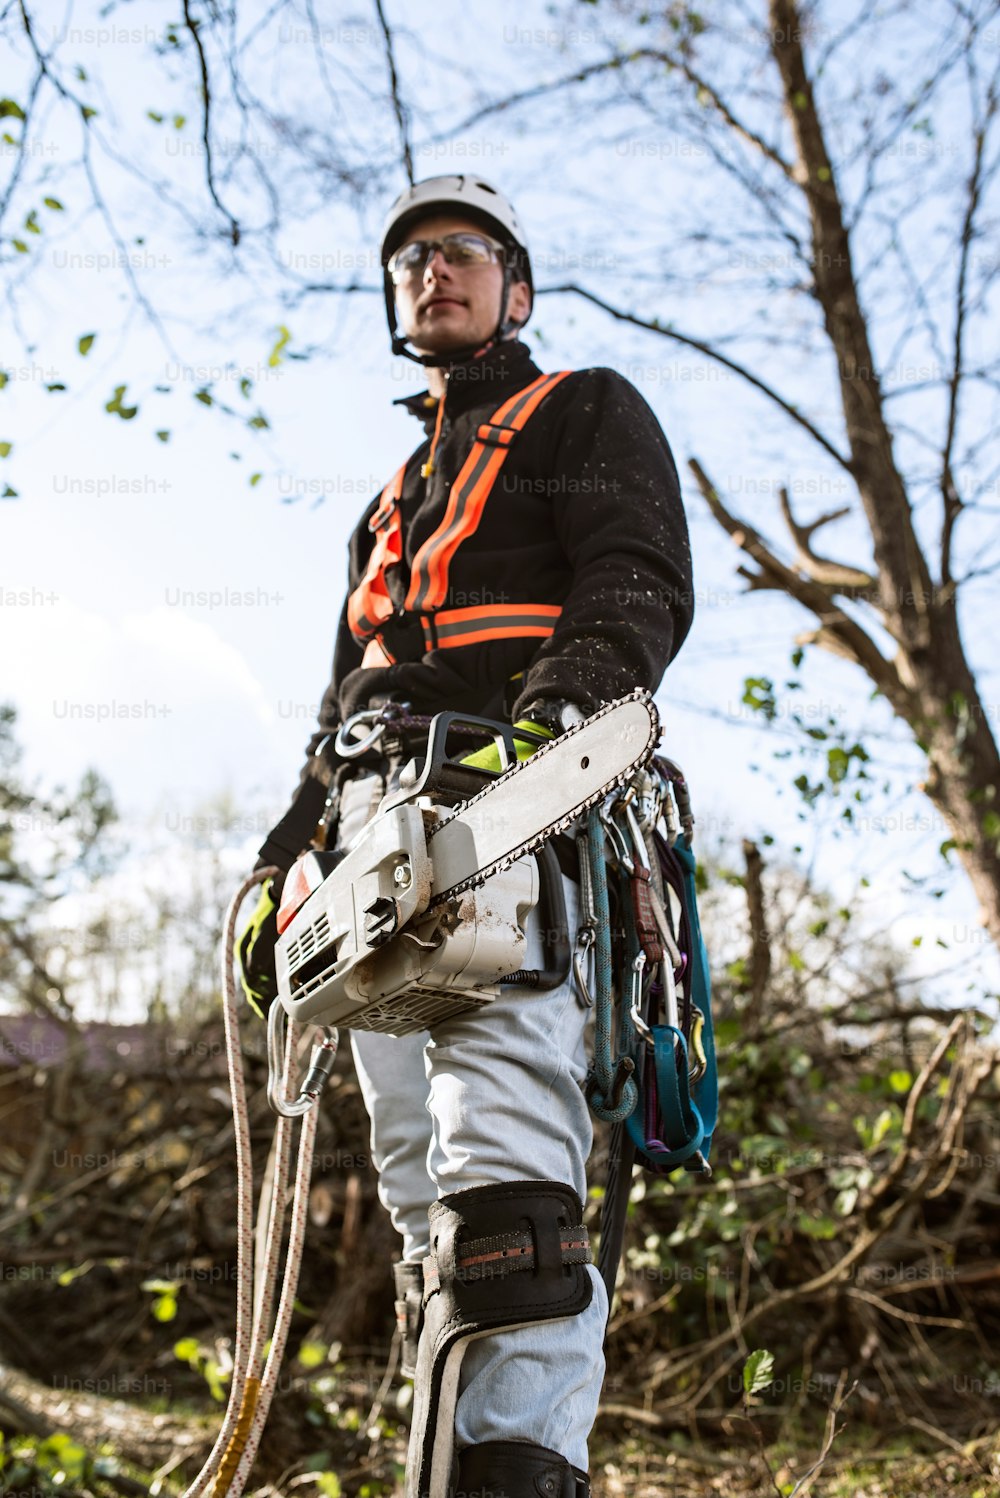 Lumberjack with chainsaw and harness prepared for pruning a tree. A tree surgeon, arborist going to climb a tree in order to reduce and cut his branches.